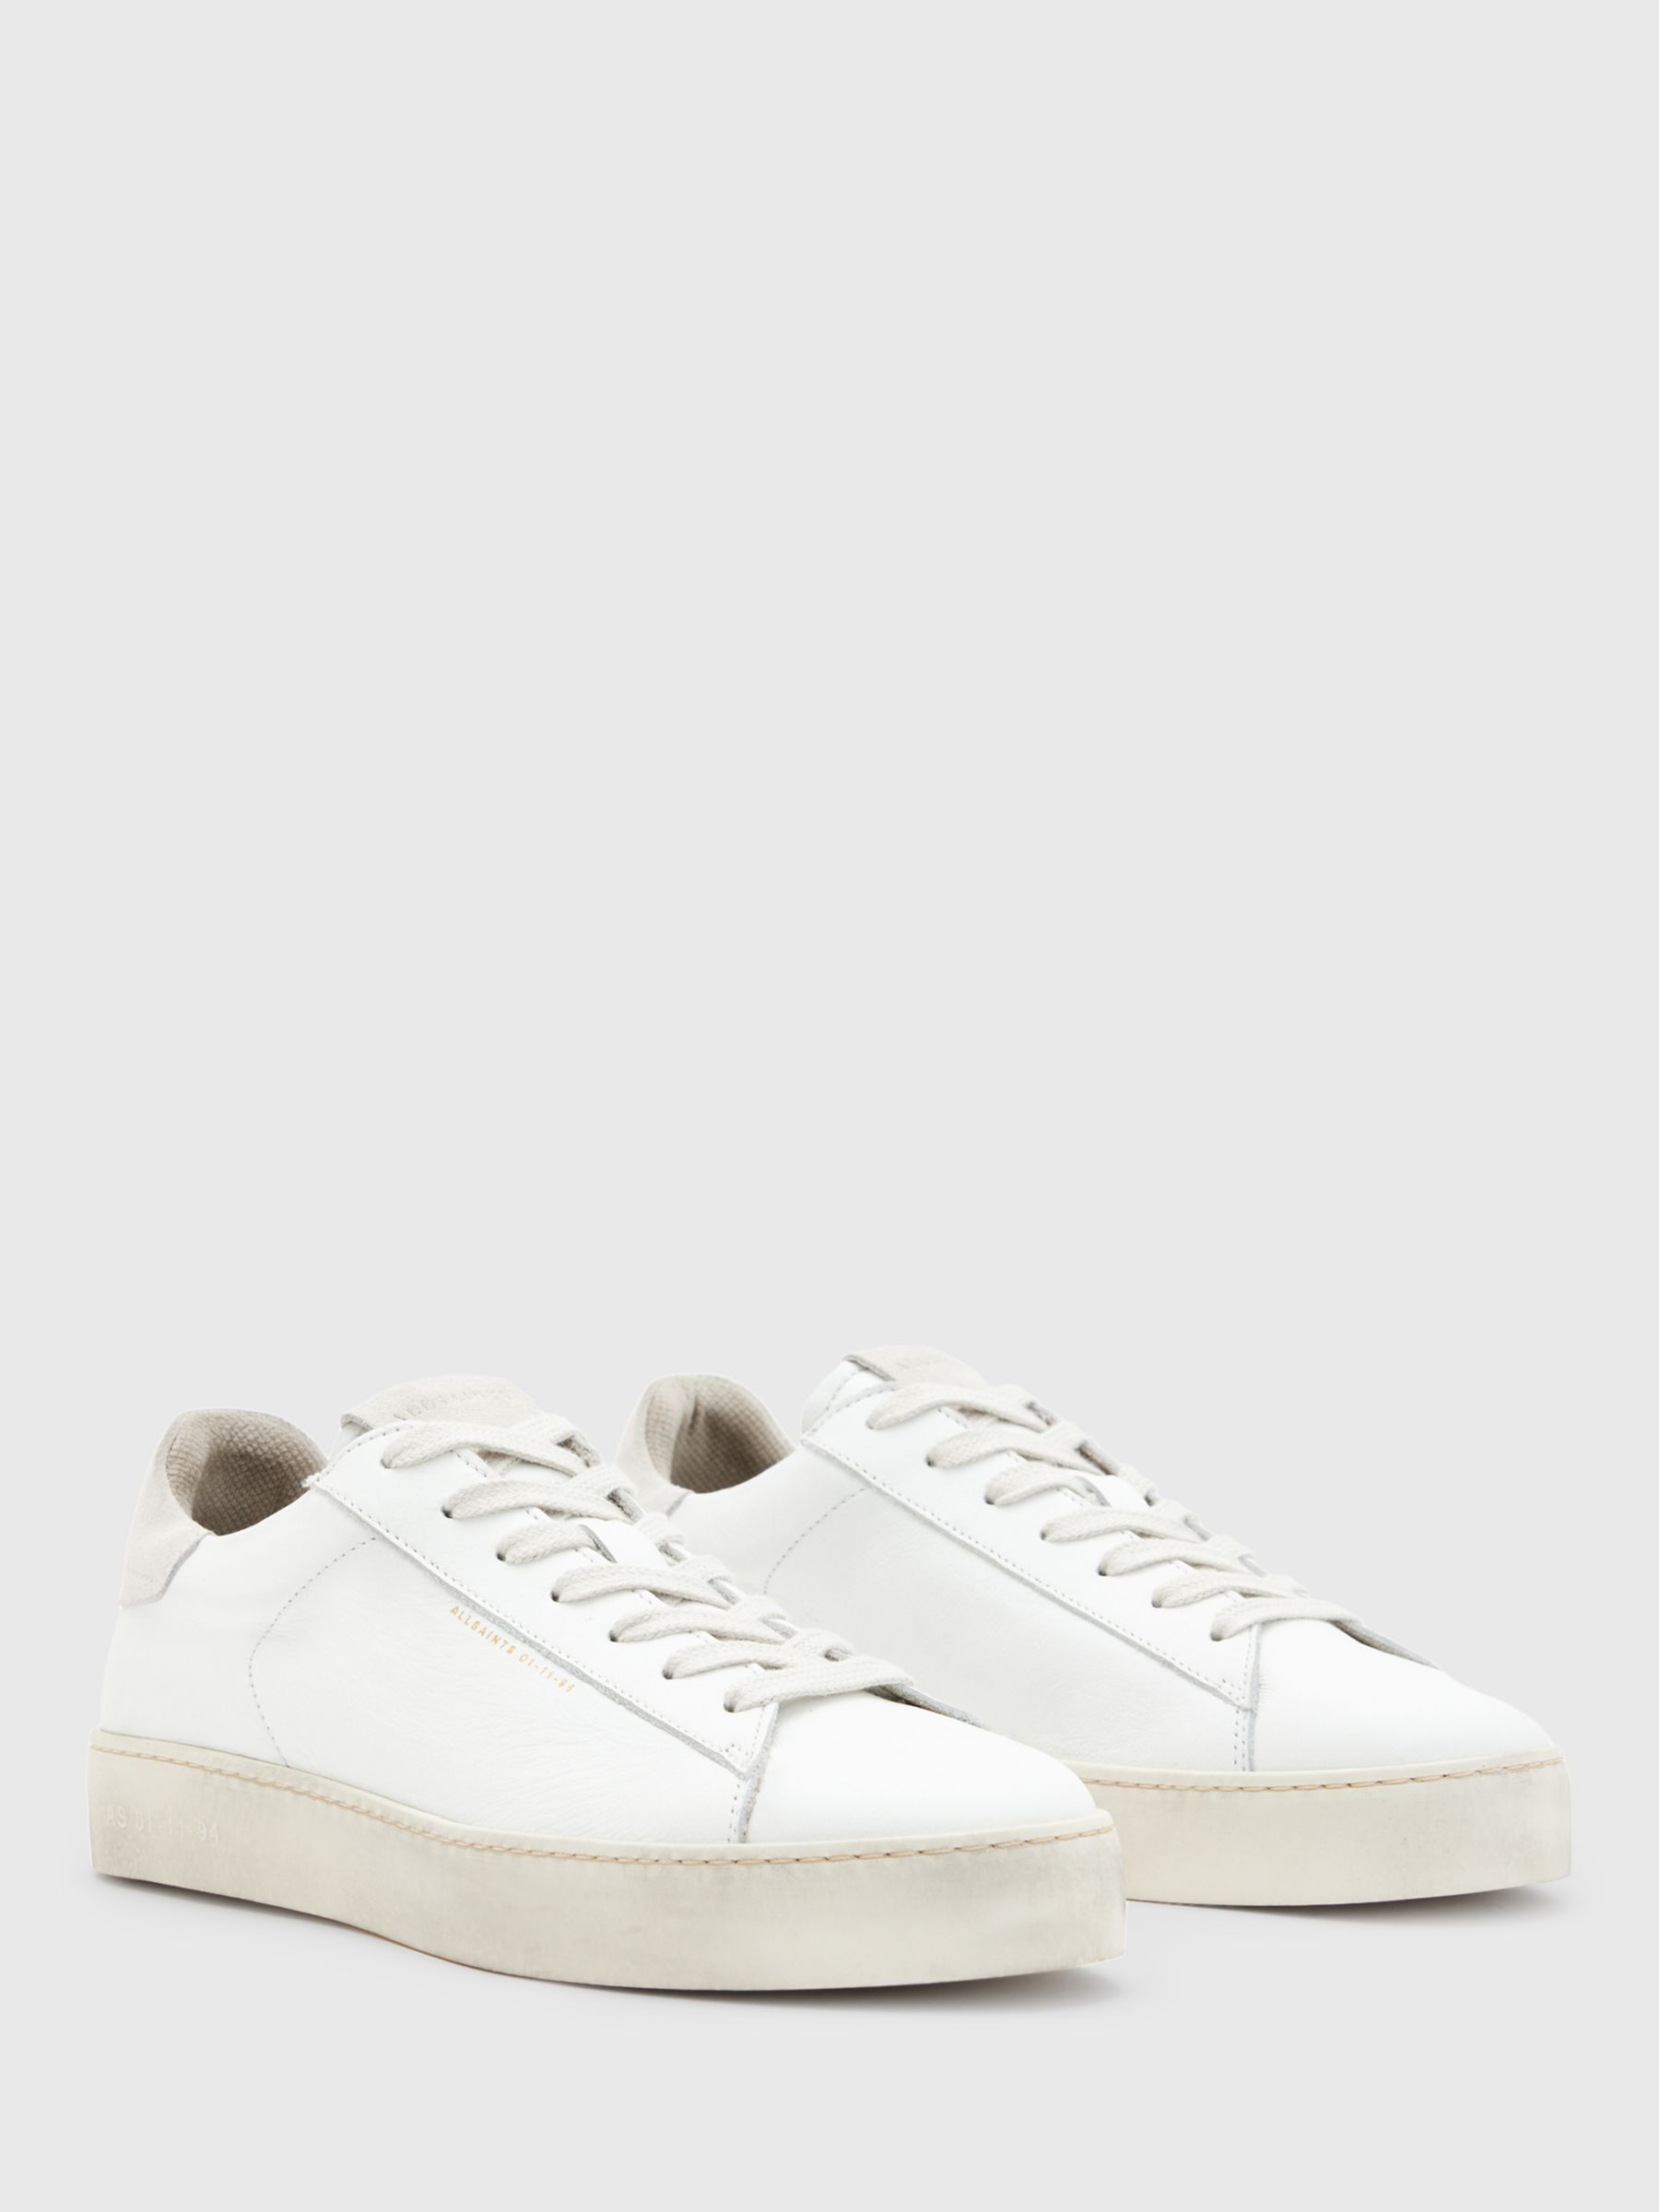 AllSaints Shana Leather Lace Up Trainers, White at John Lewis